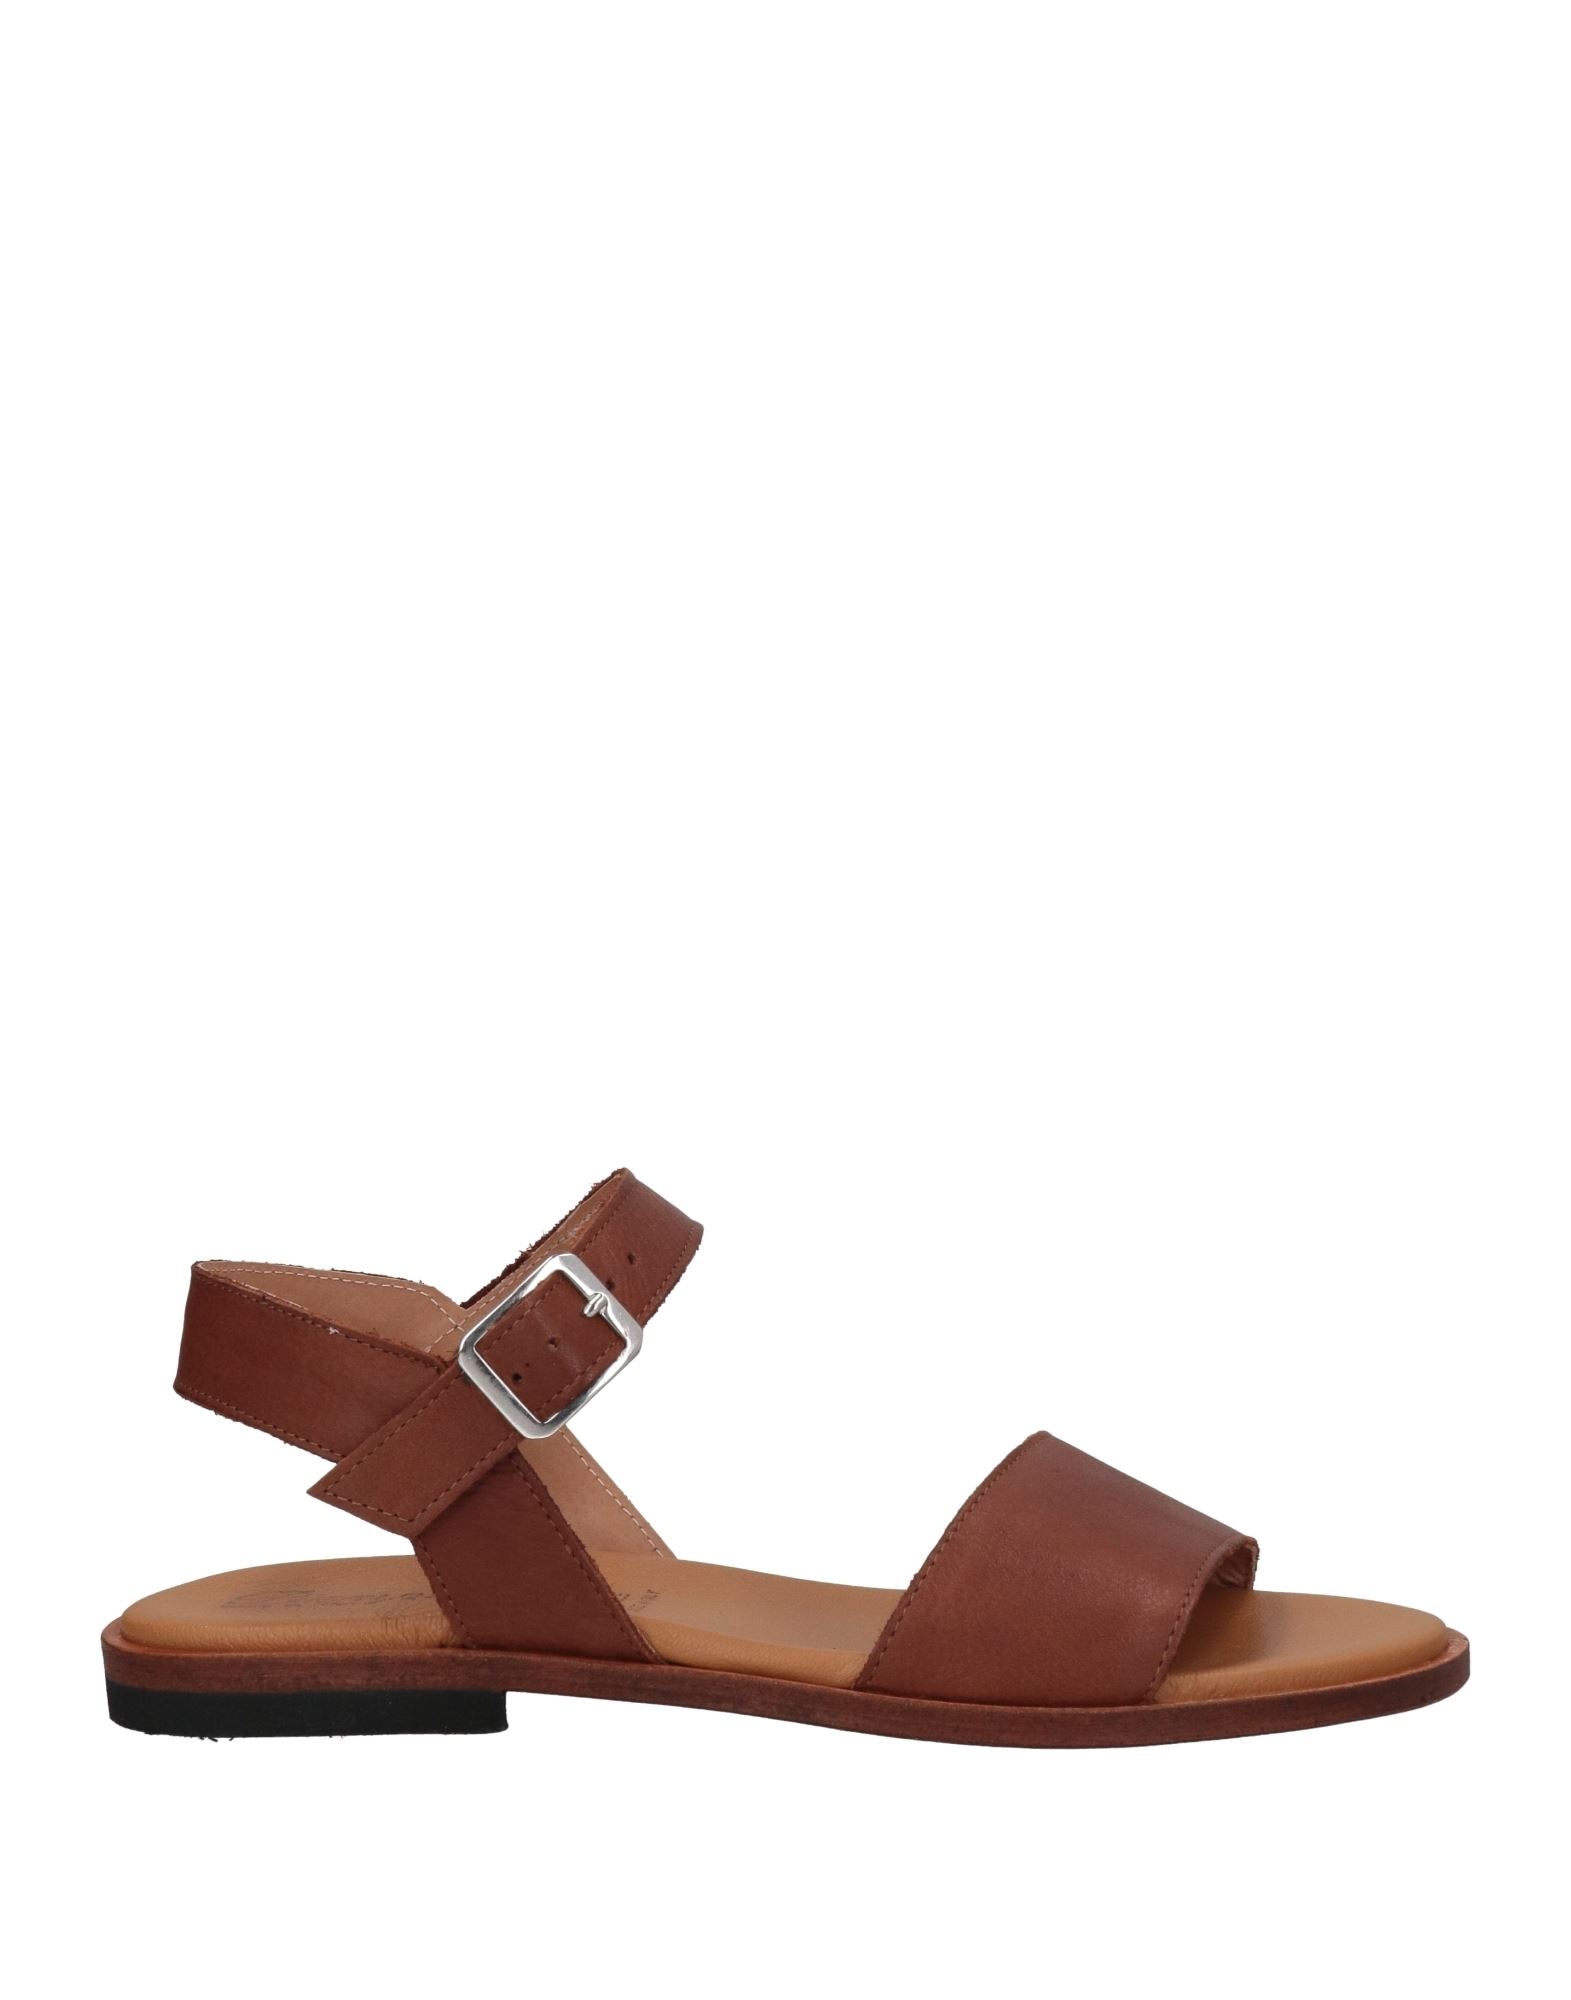 Piampiani Woman Sandals Tan Size 11 Soft Leather In Brown